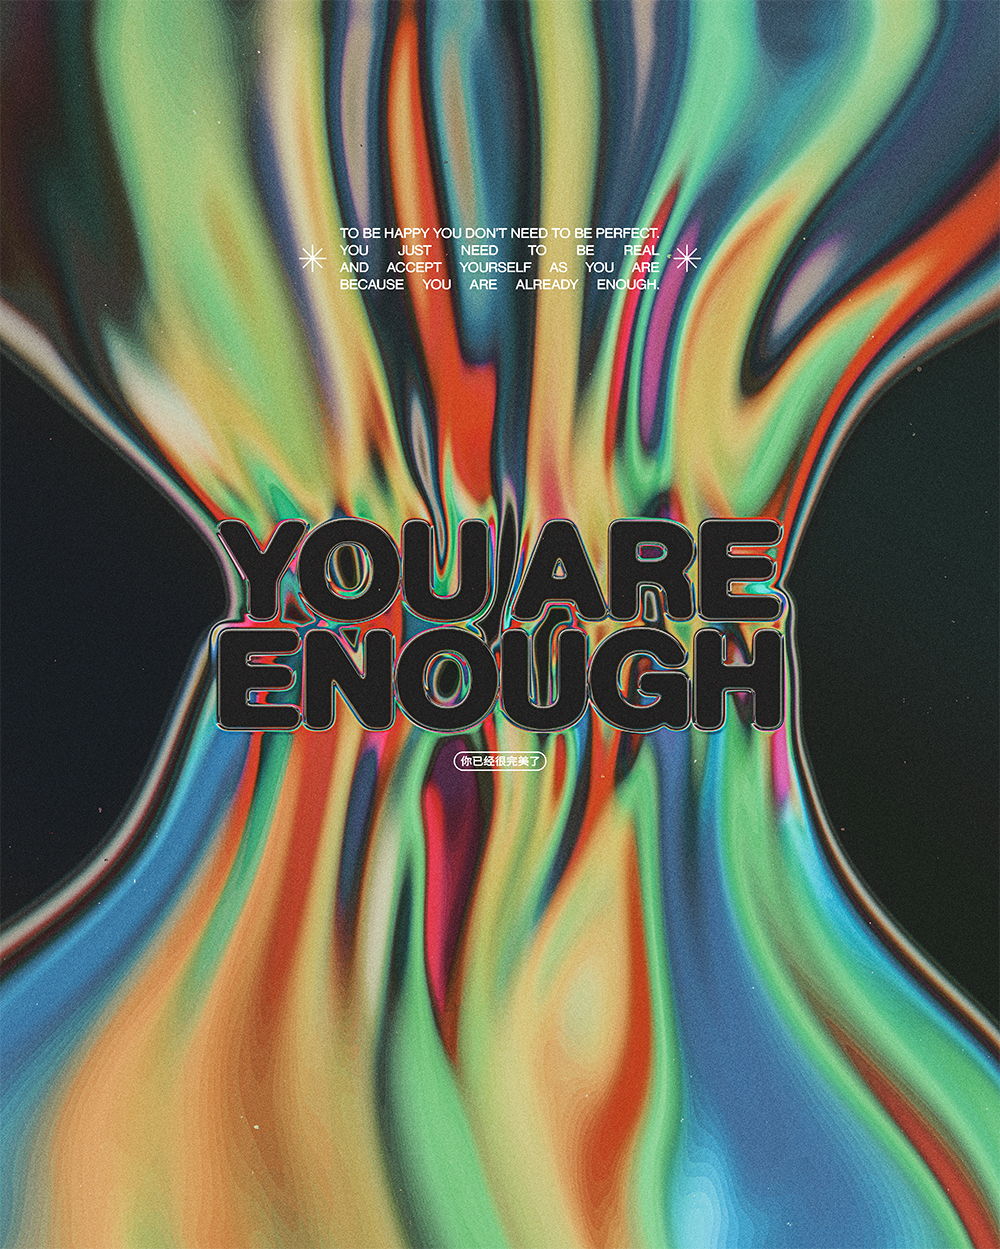 “You are enough”